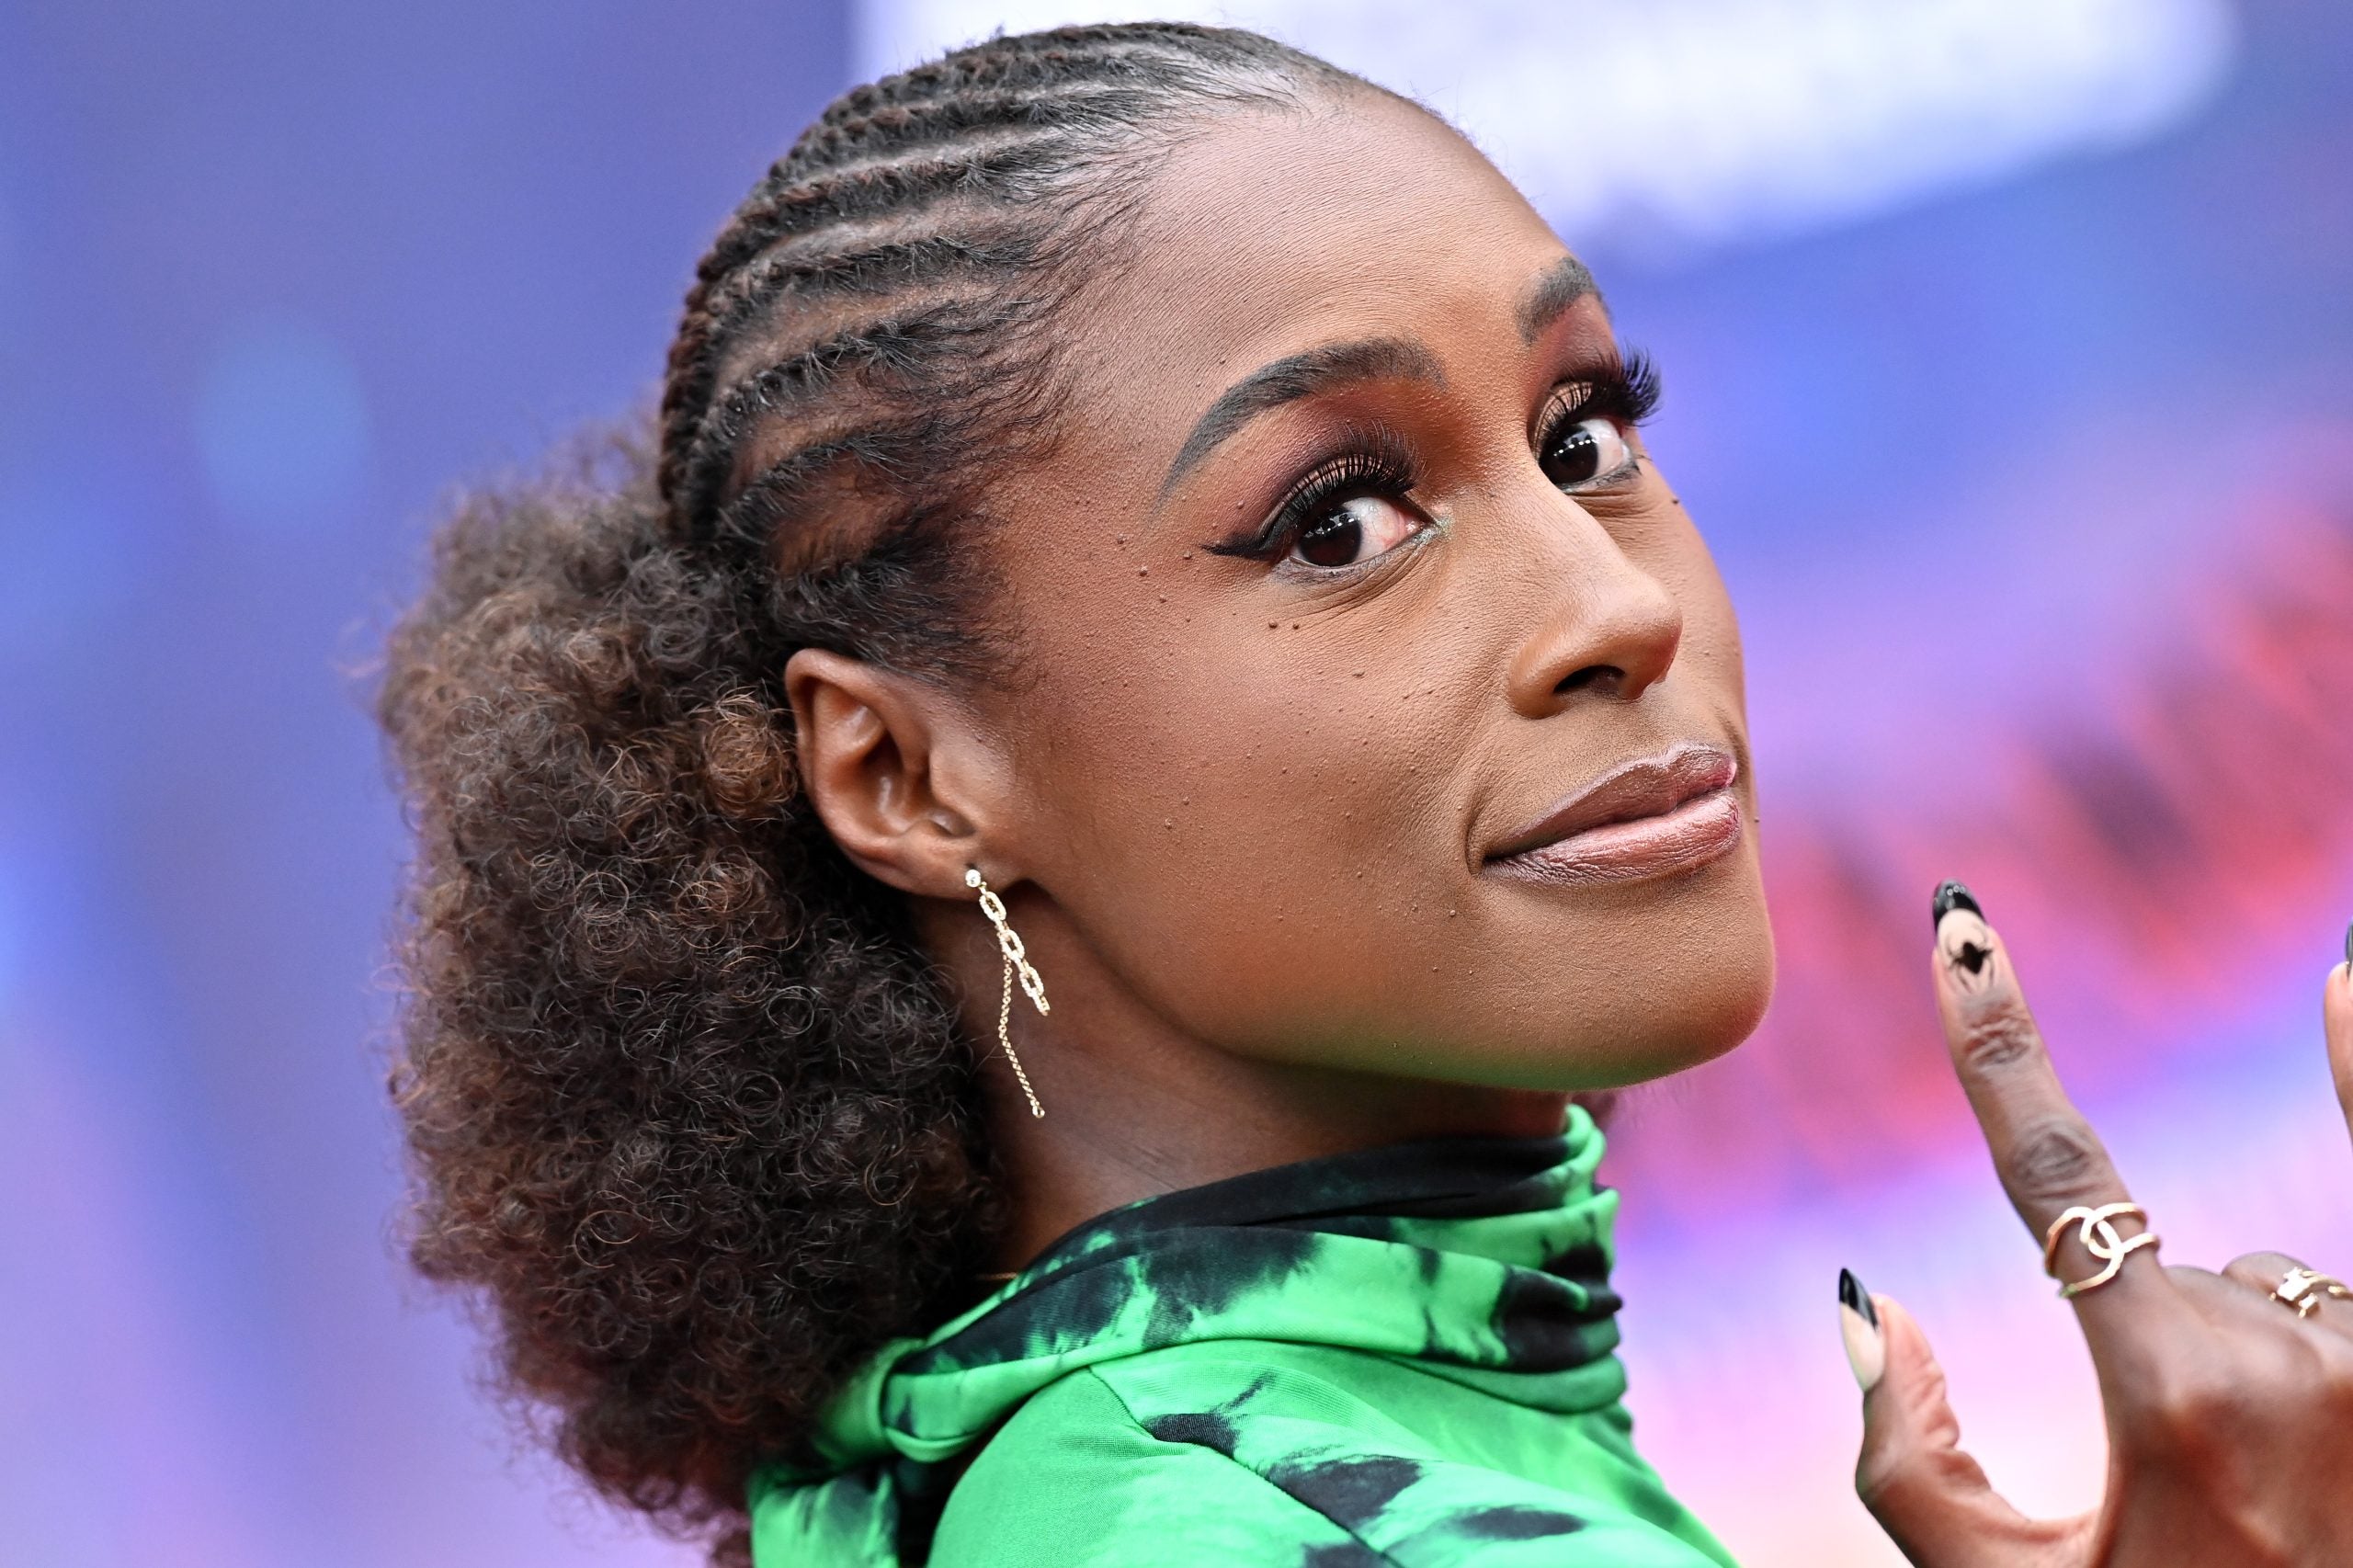 WATCH: Issa Rae Reveals What Her 'Spider-Verse' Double Is Probably Doing